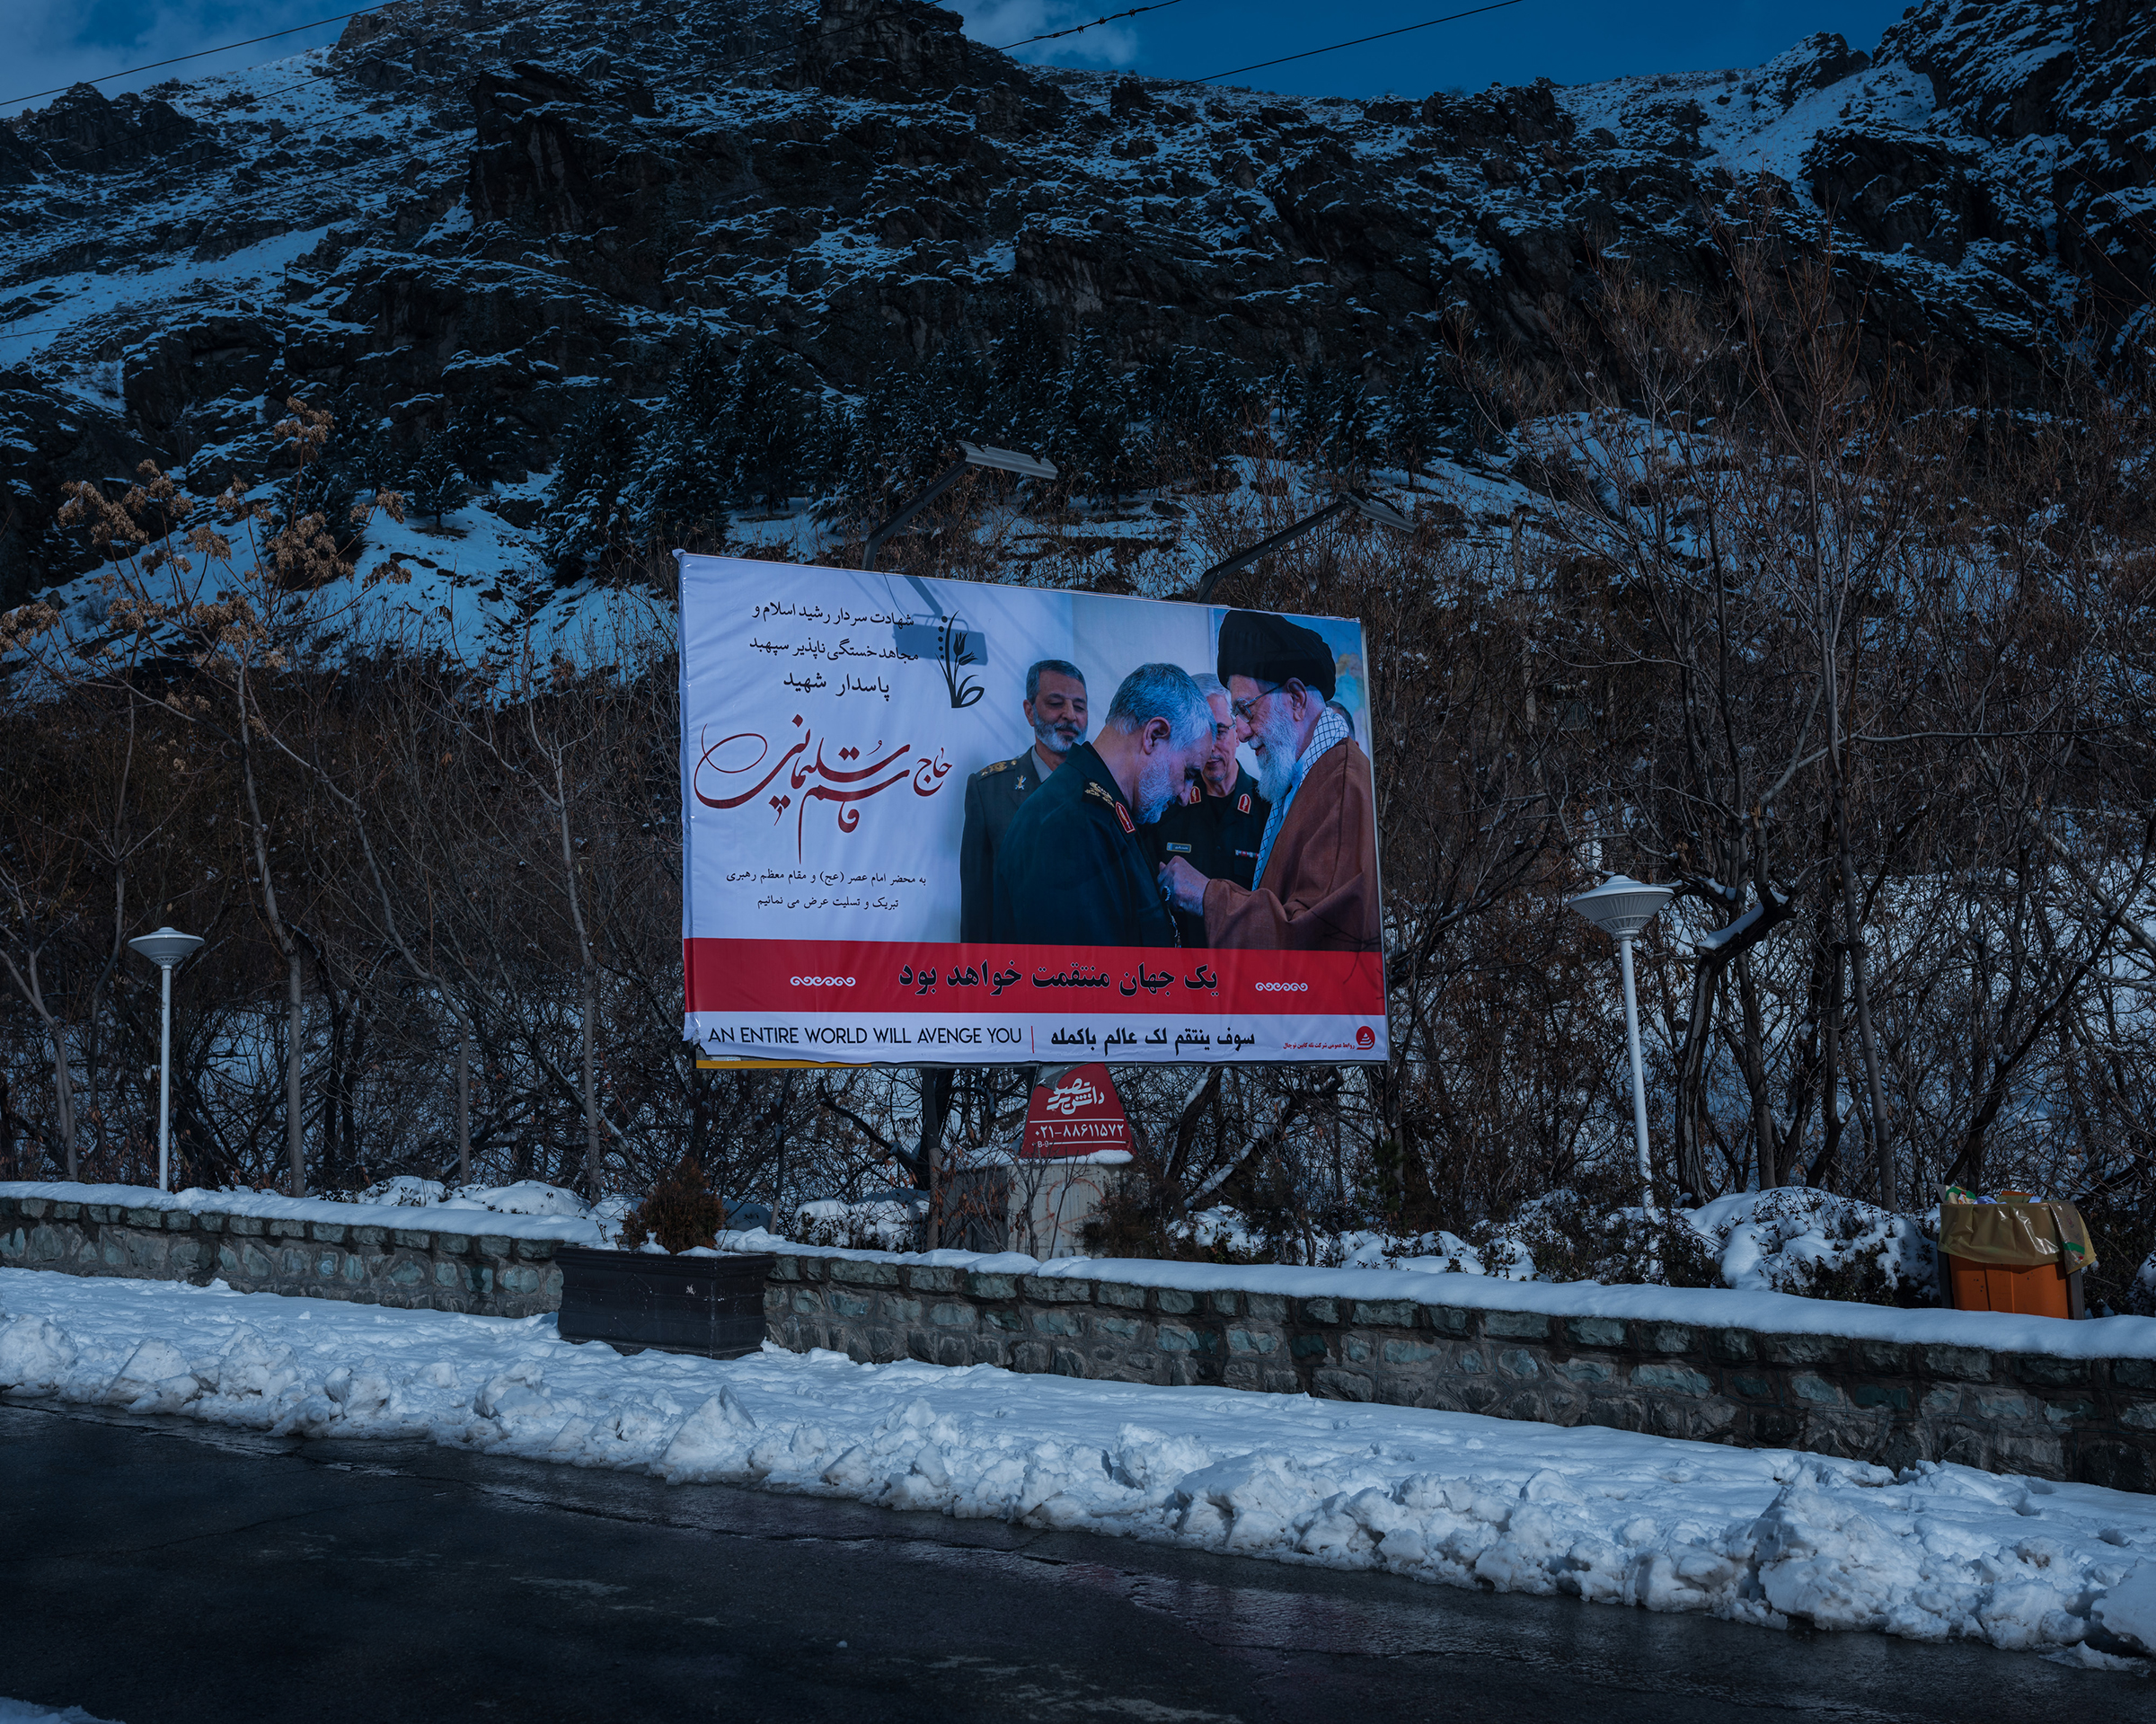 A poster showing Soleimani and the Supreme Leader, Ayatollah Ali Khamenei, in the snowy mountains above Iran’s capital. (Newsha Tavakolian—Magnum Photos for TIME)